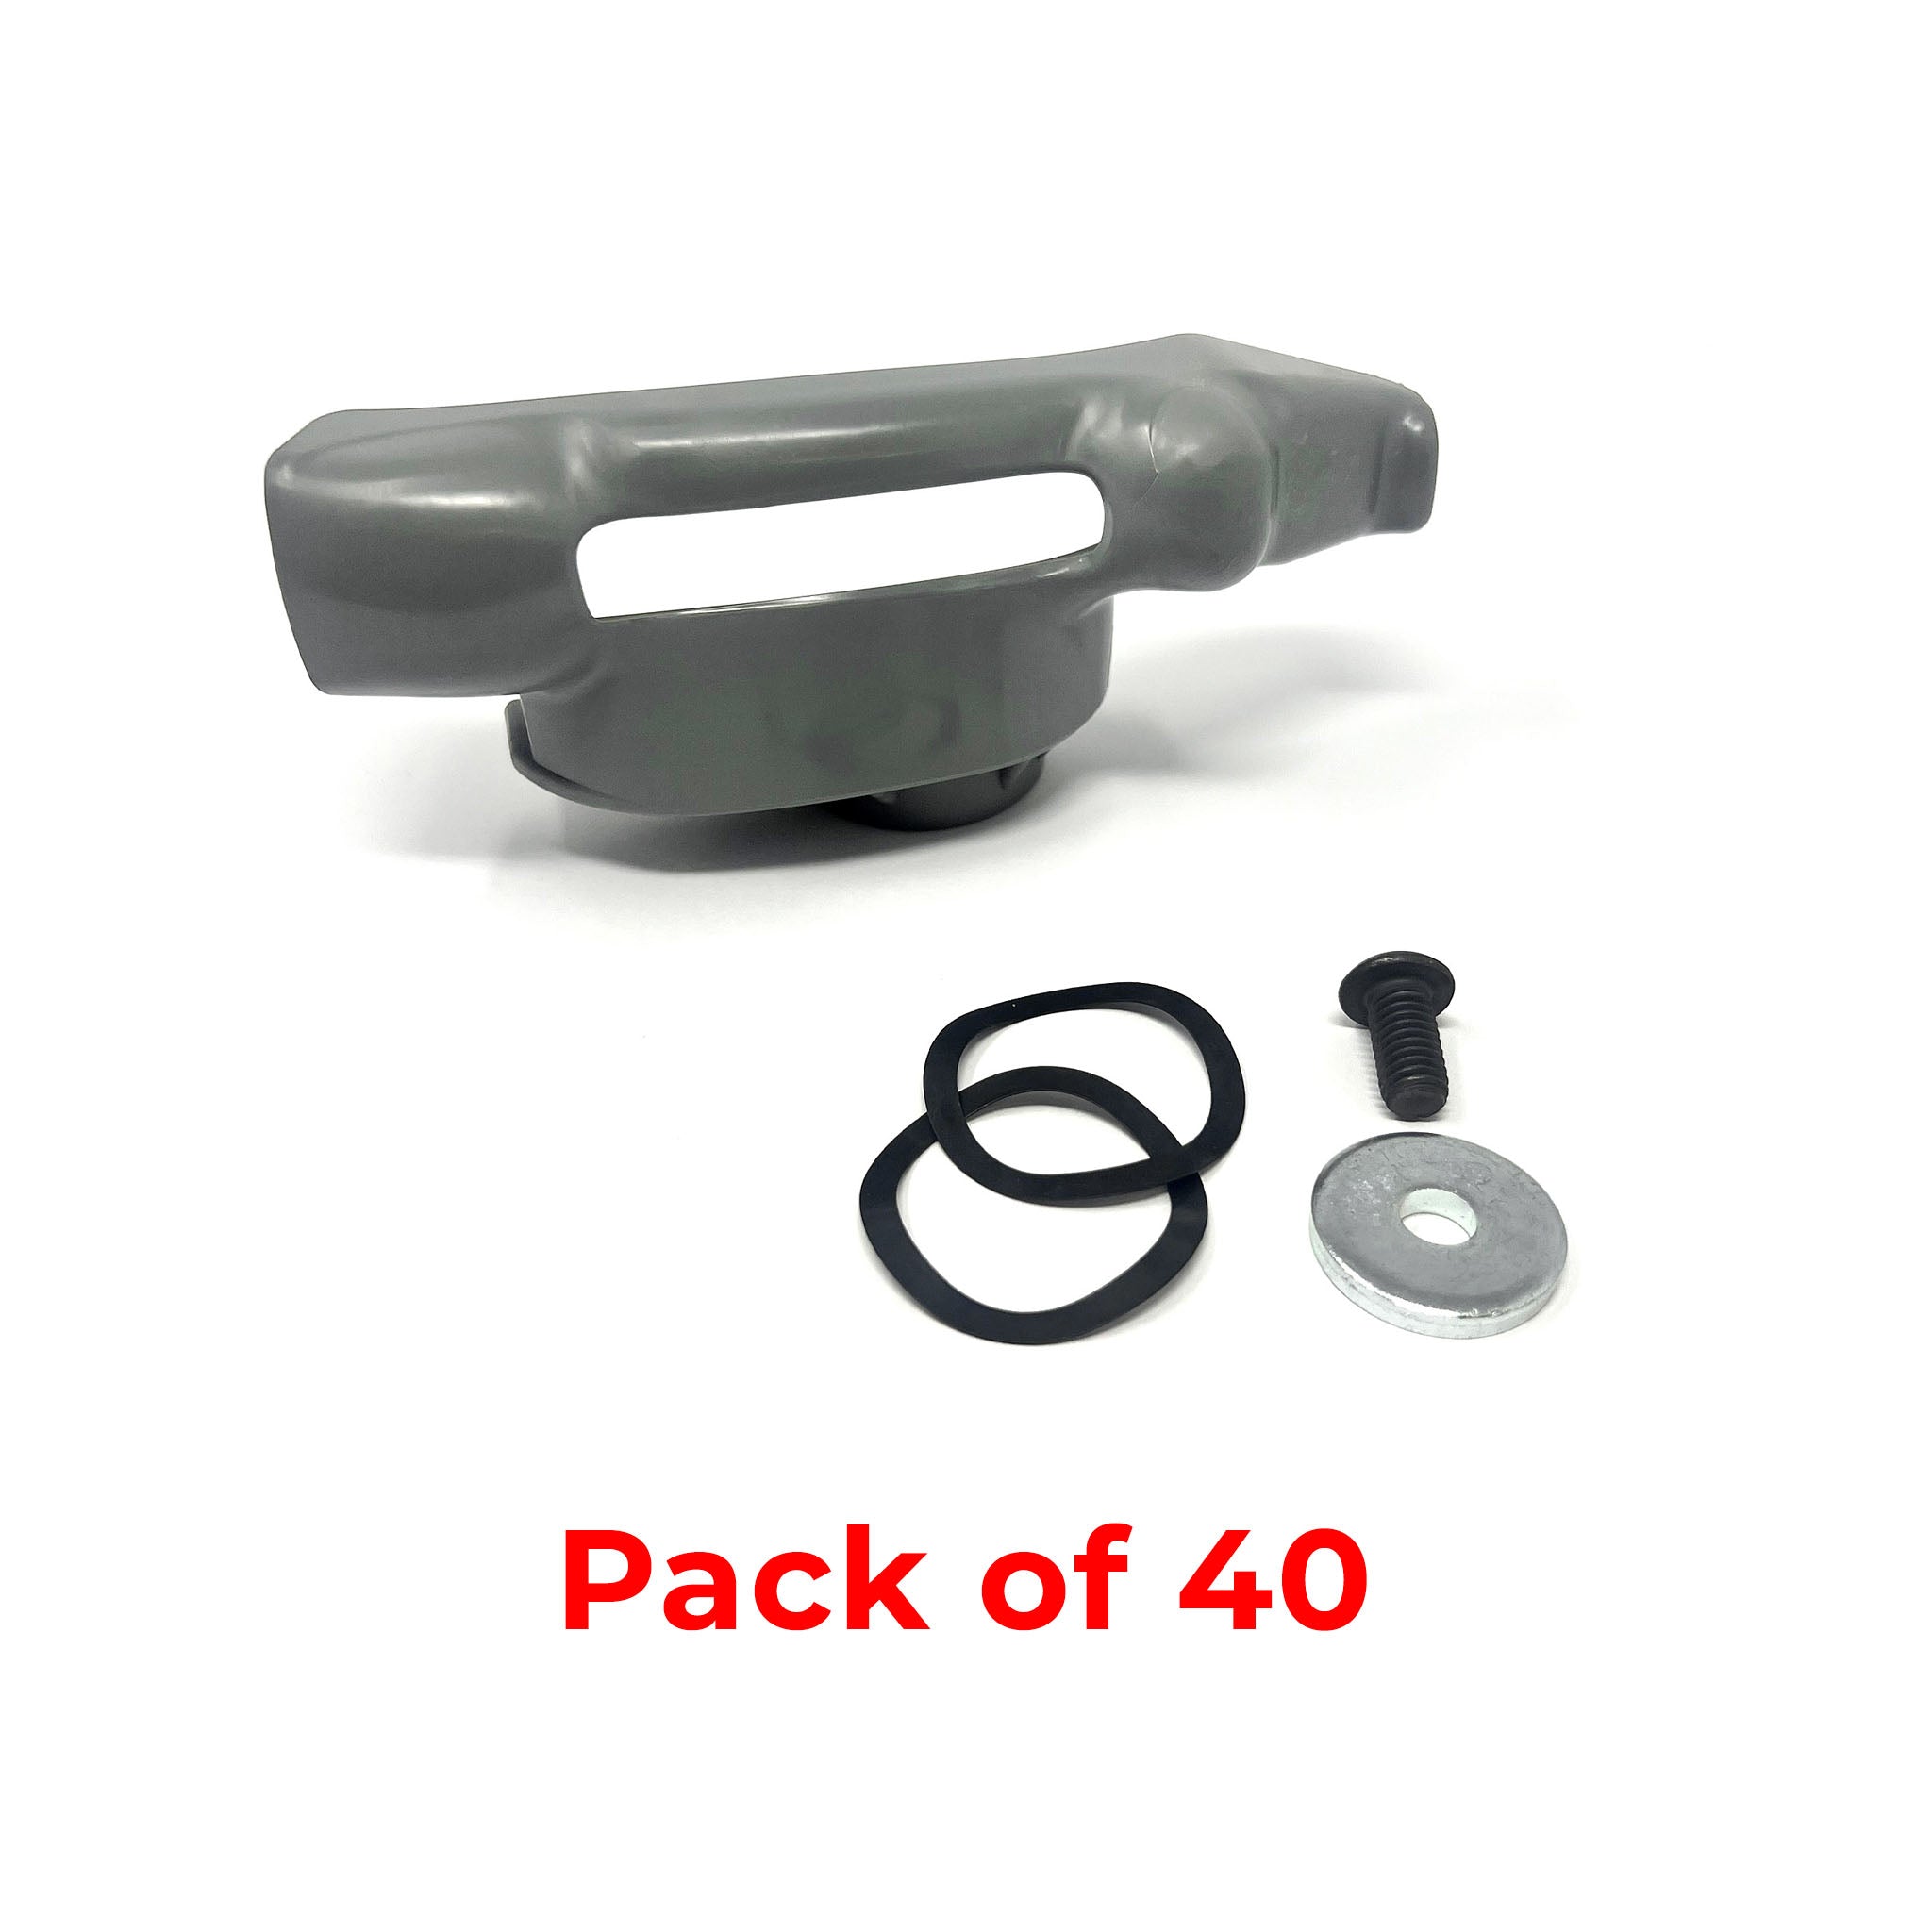 High Spoke M/D Head w/ Low Profile for Coats - USA MADE! Gray - 40 pk